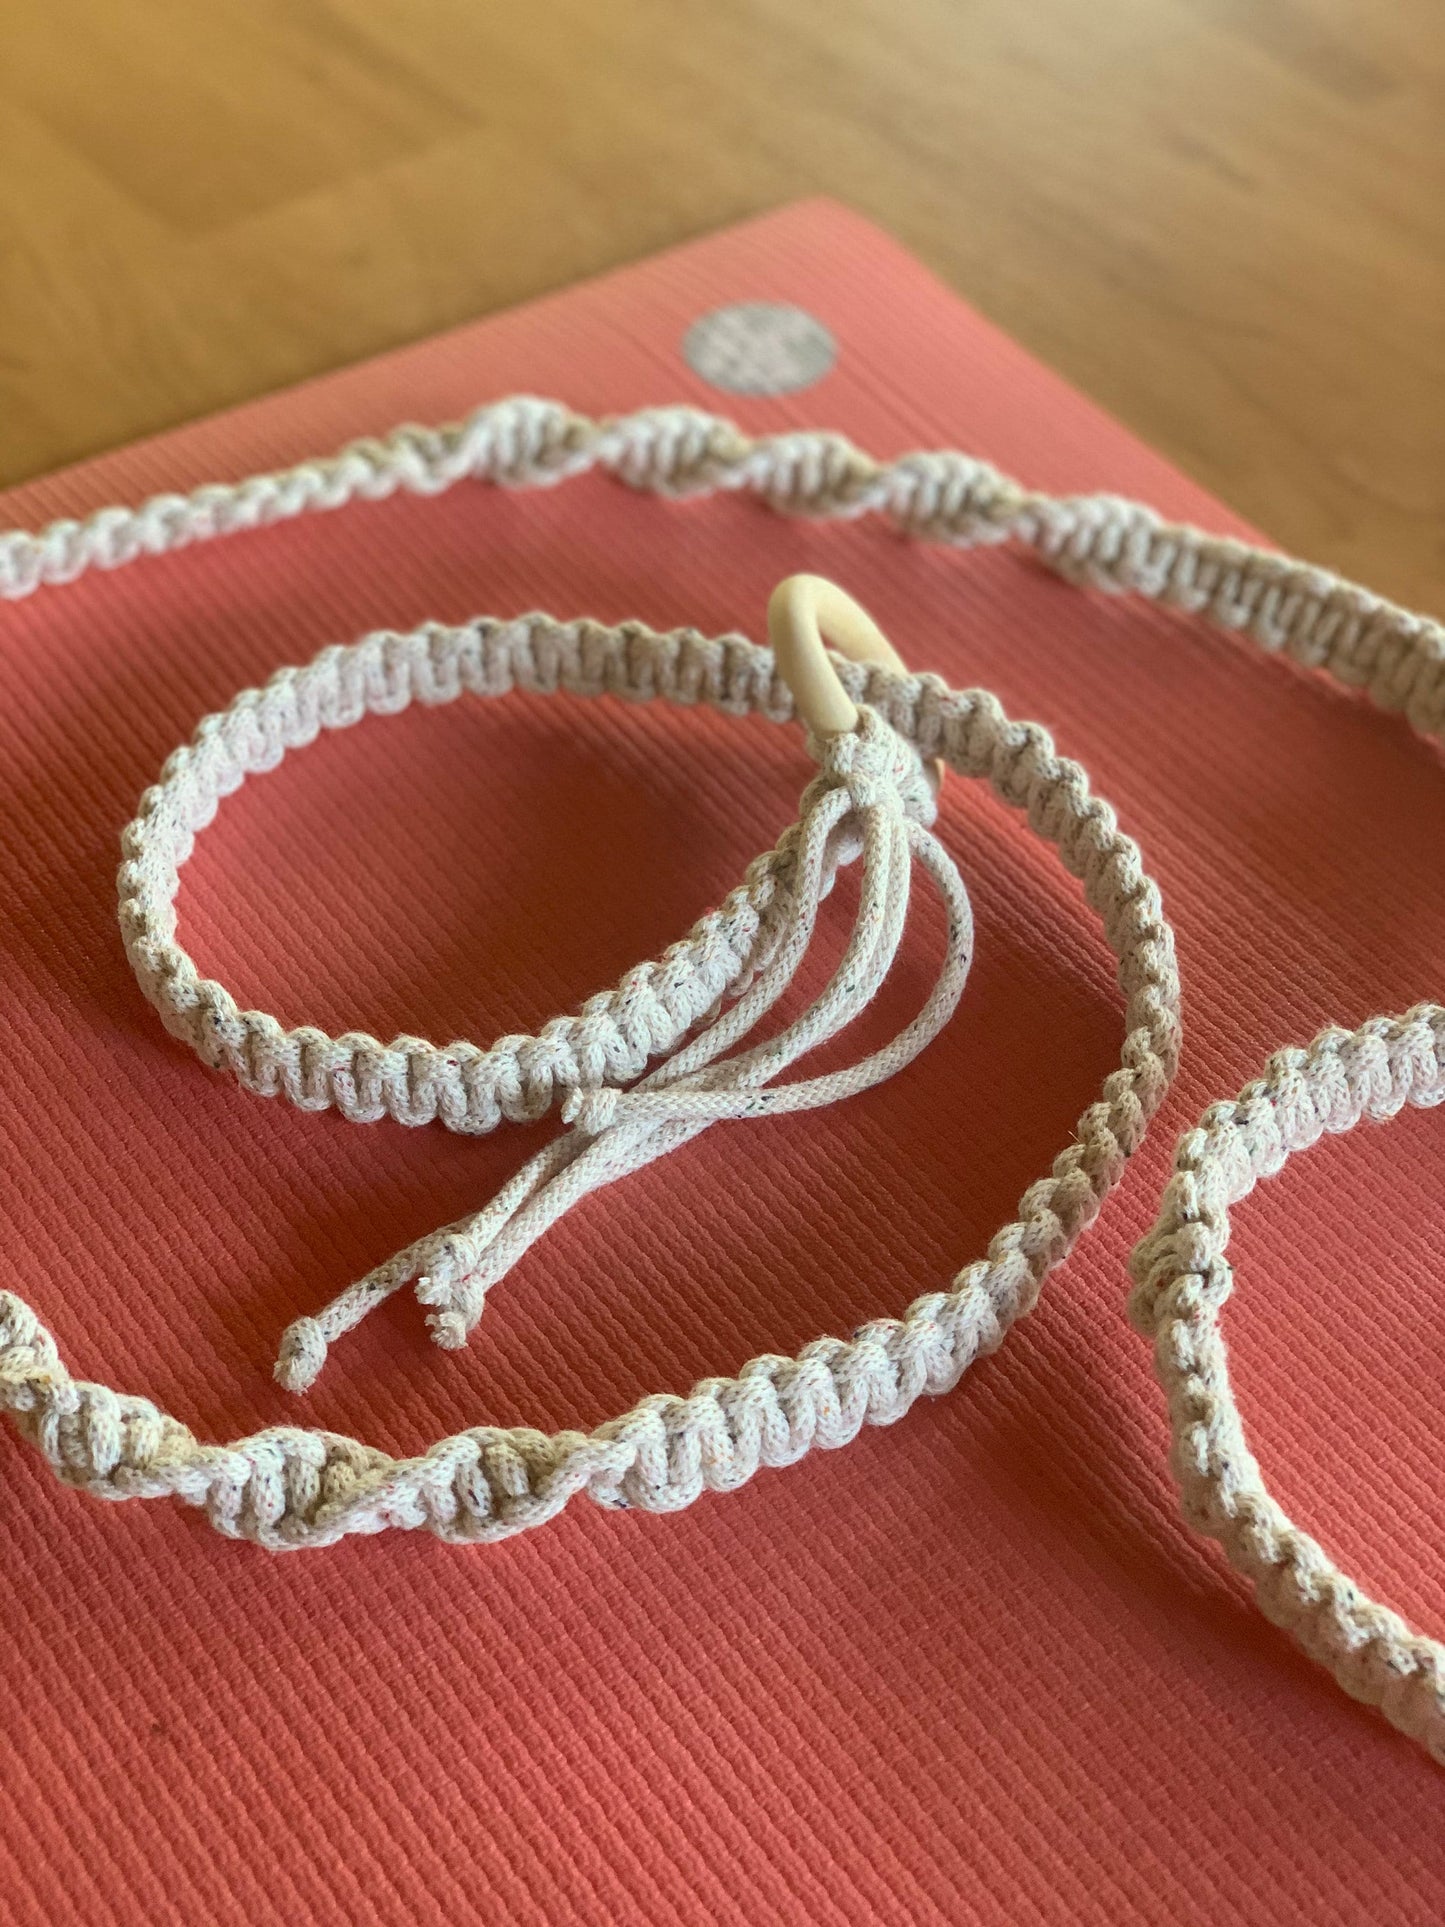 Macrame yoga mat strap that I made and created. :) the wooden ring folds  back on itself and you pull the cord through to create a loop for the mat  to slide